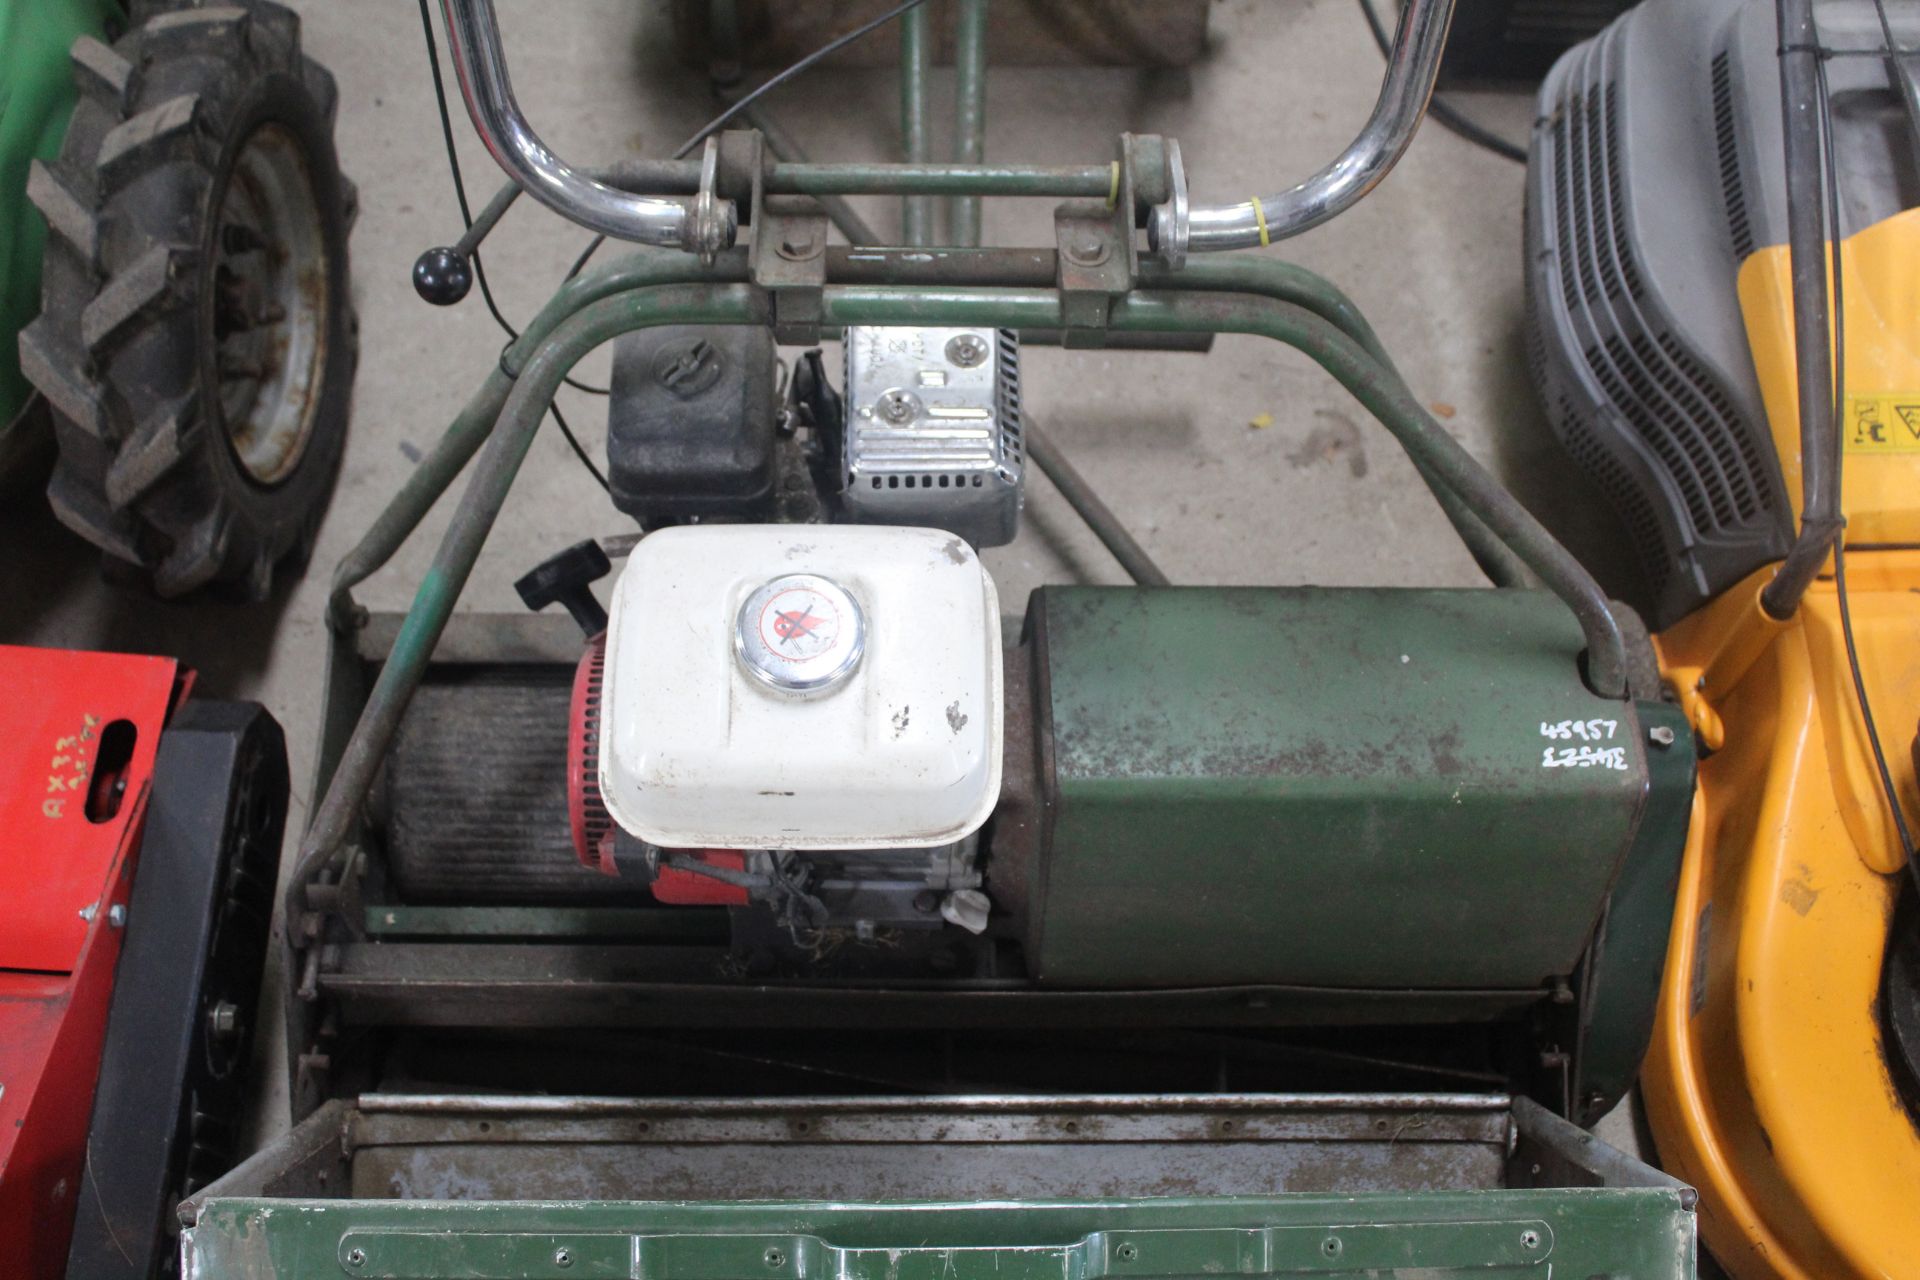 Atco B30 Royal lawn mower. With roller seat and grass box. From local deceased estate. - Image 3 of 11